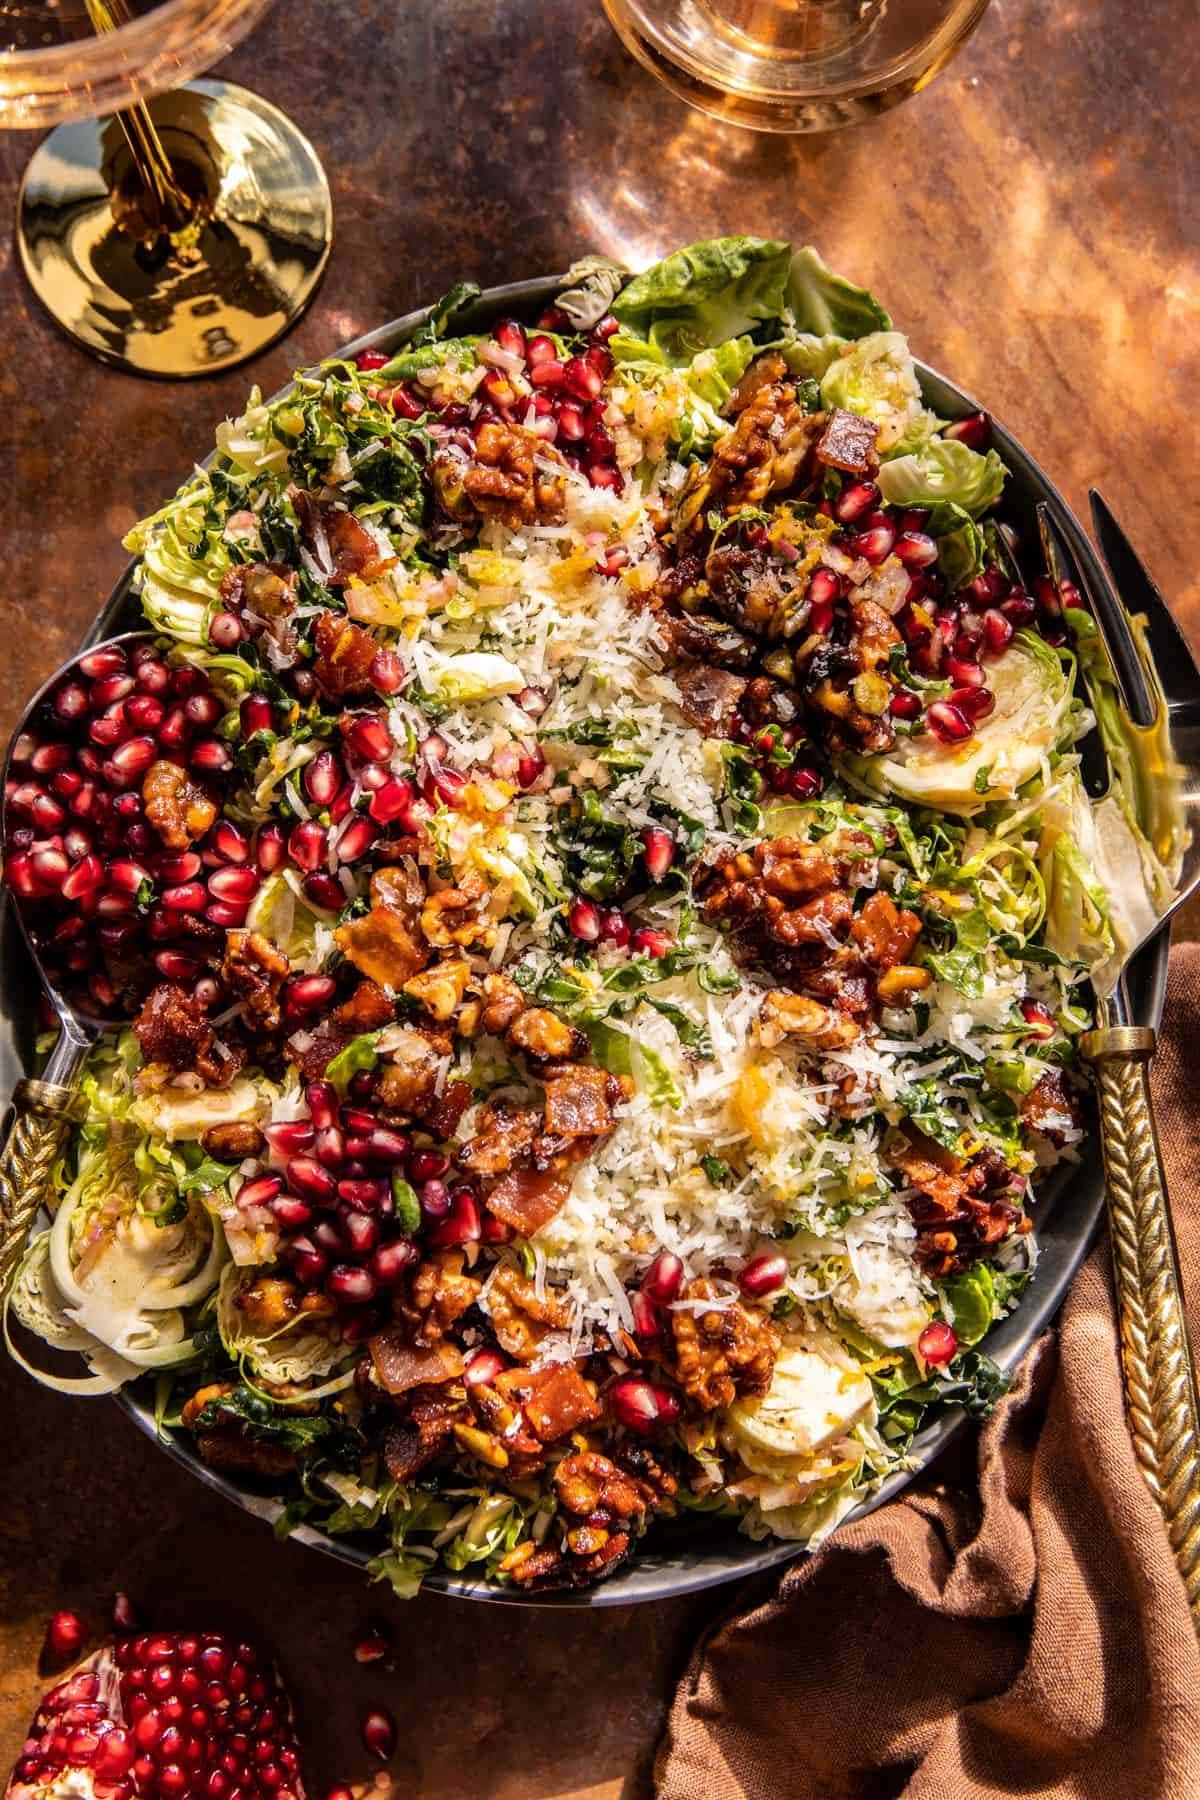 Salad with shredded brussels sprouts, kale, nutty Manchego cheese, warm candied bacon, buttered walnuts, and sweet pomegranates.